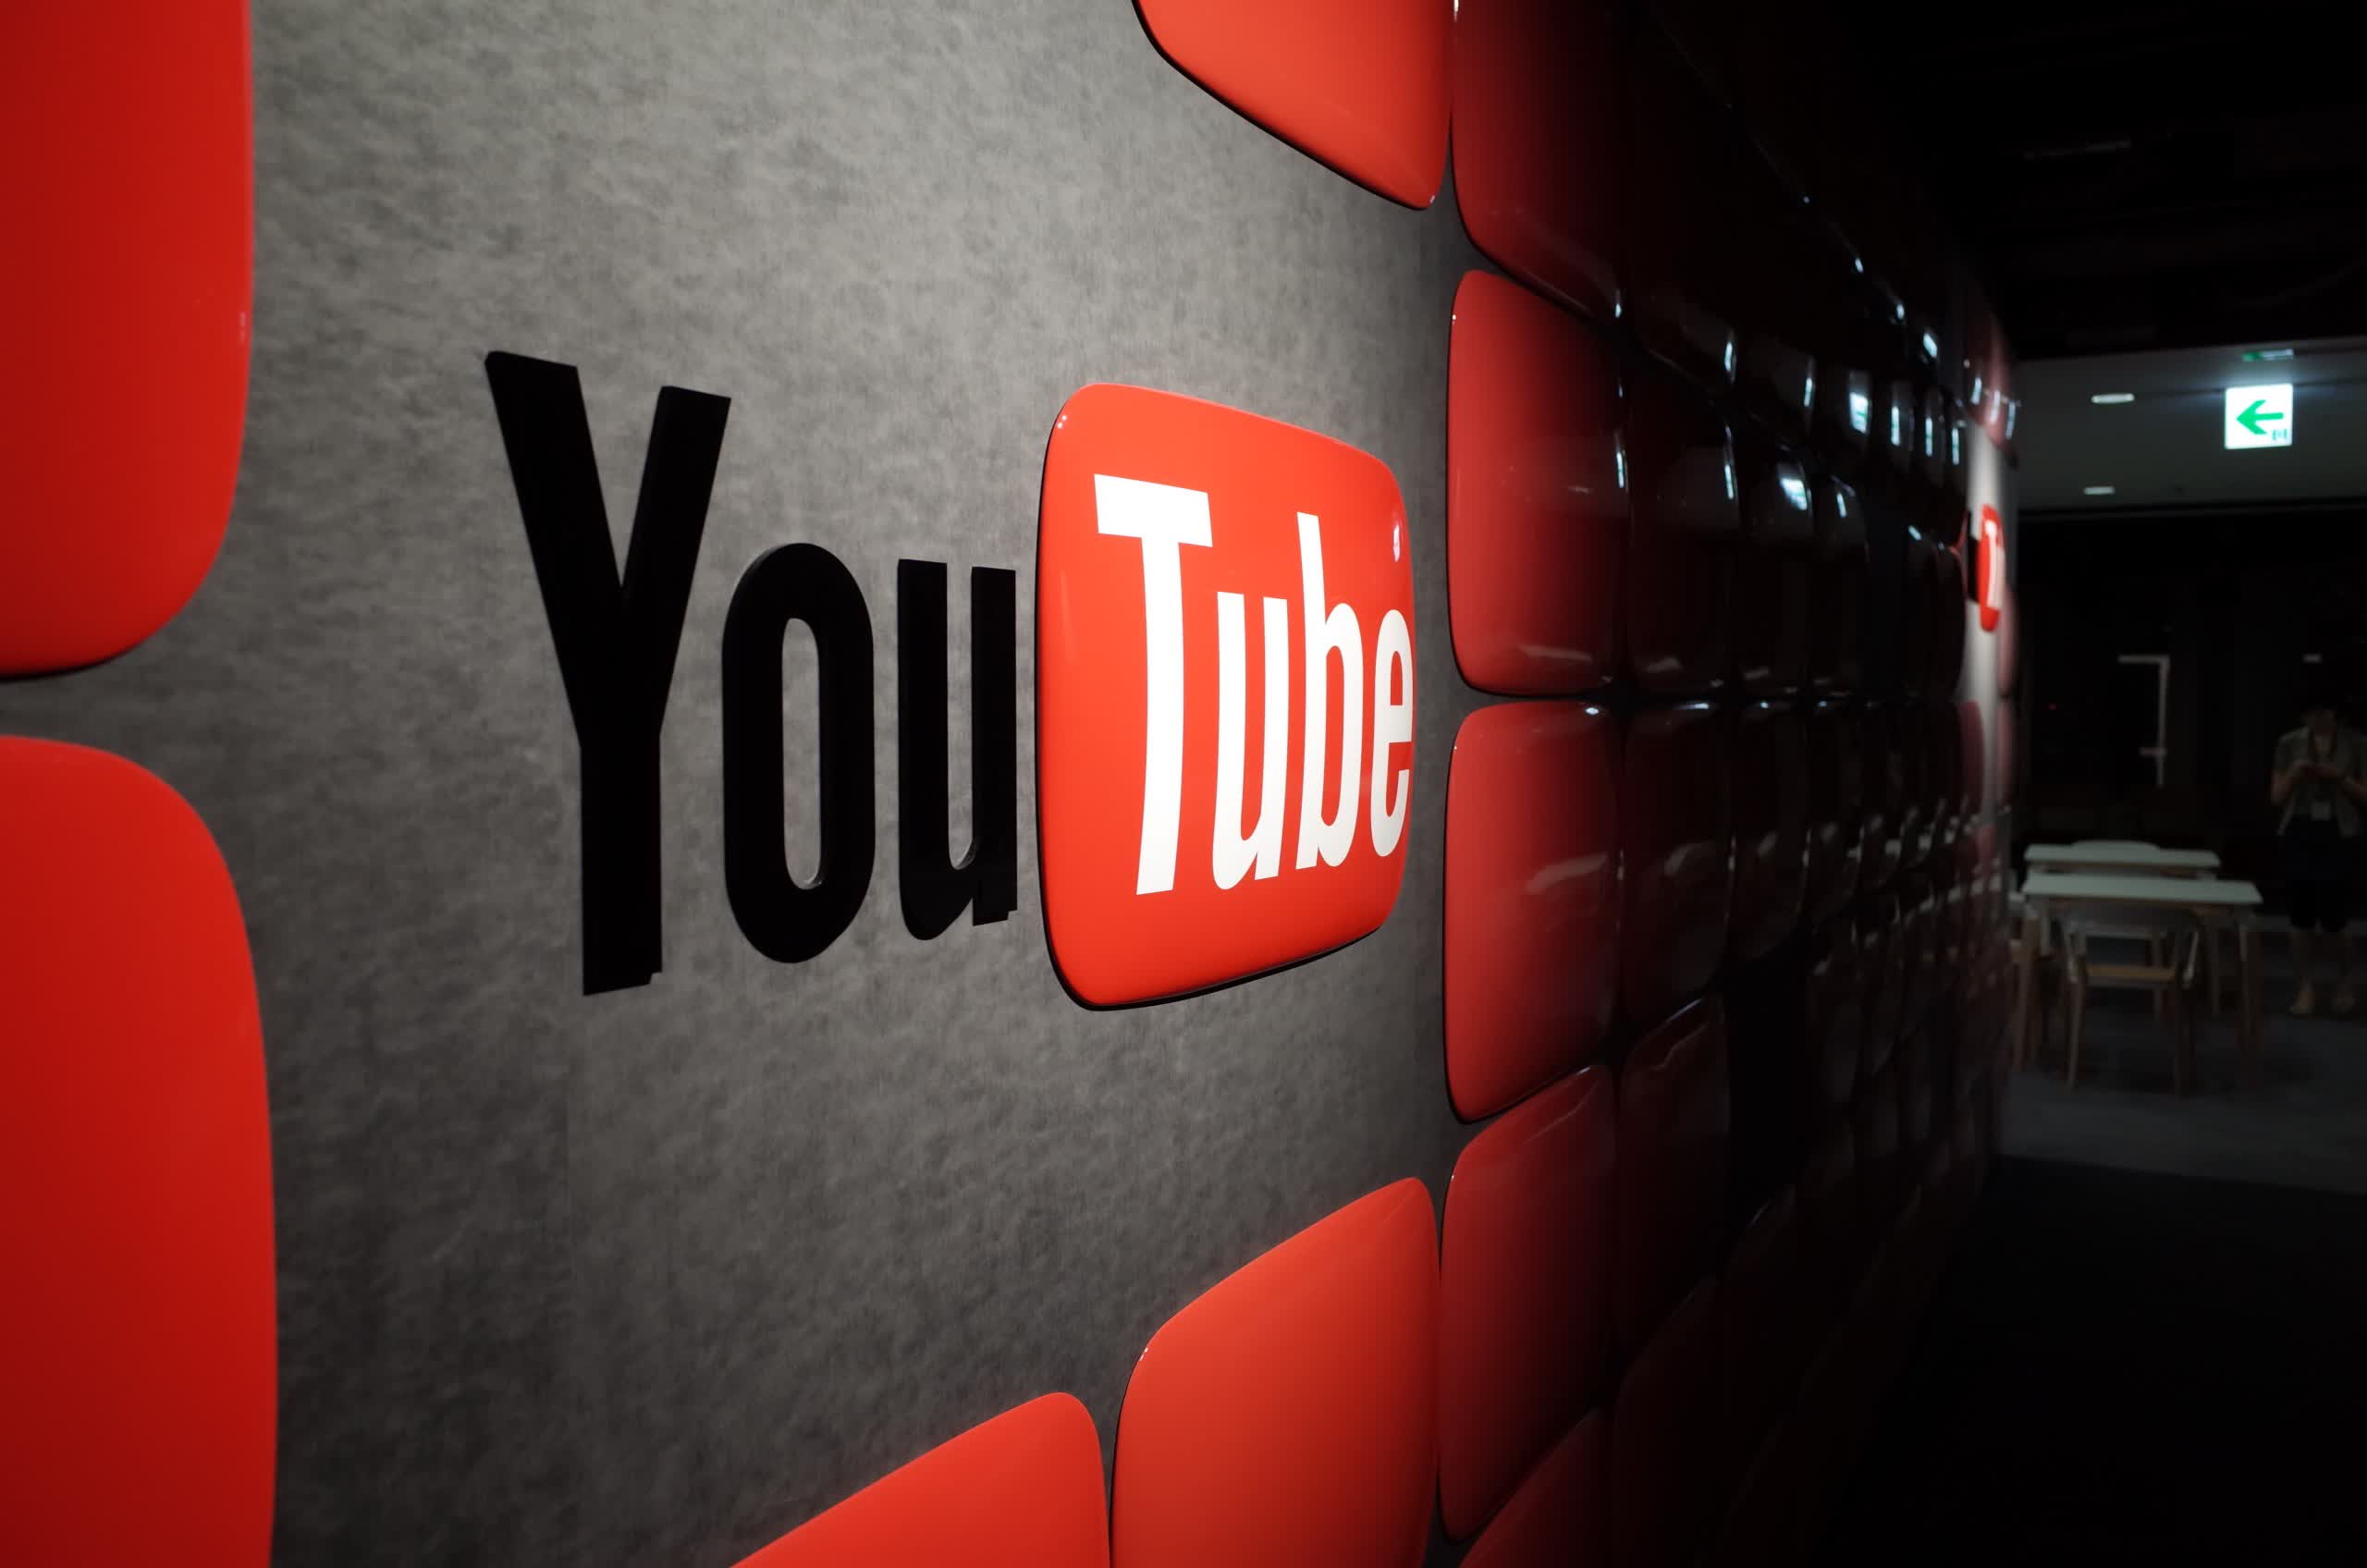 YouTube escalates battle against ad blockers, rolls out site slowdown (update)